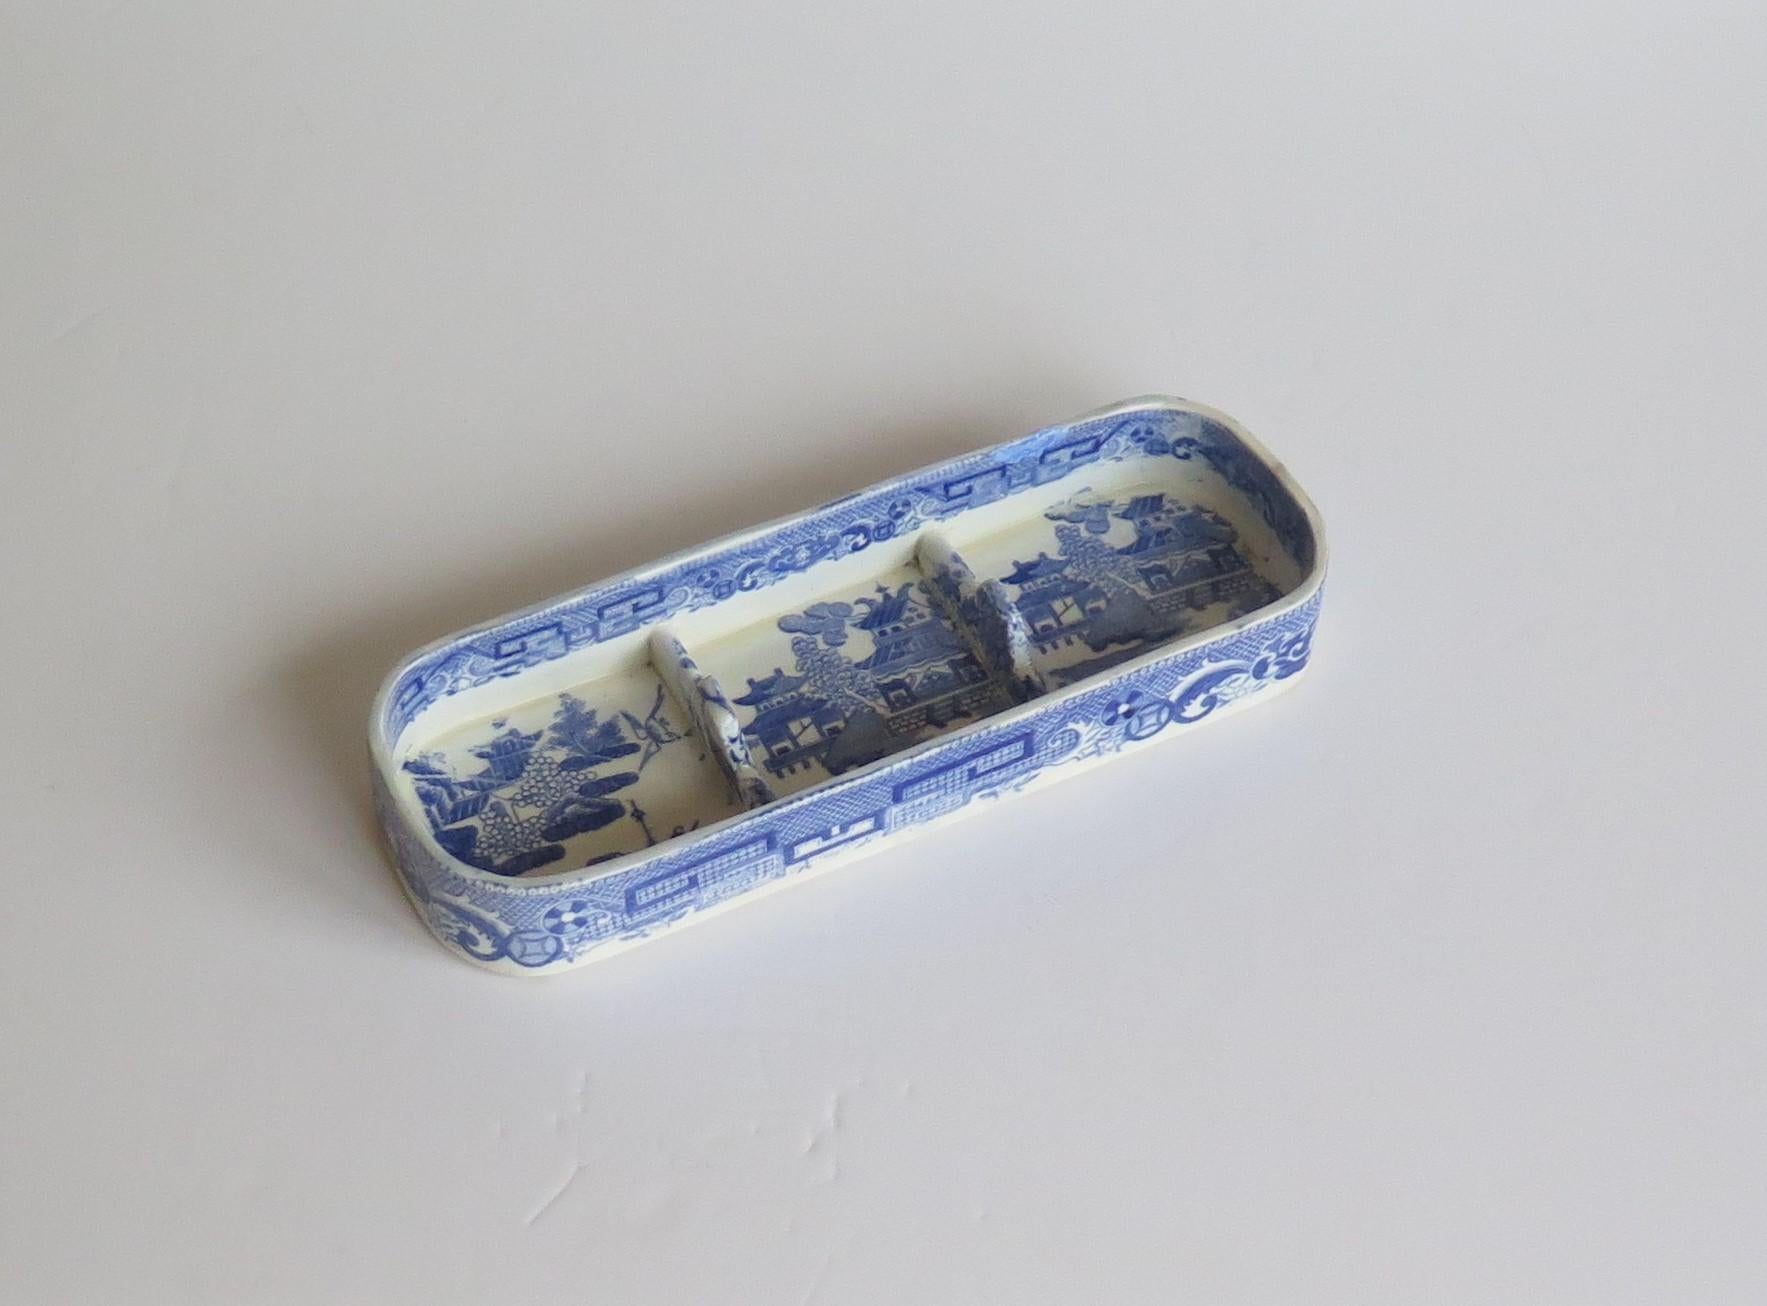 English Rare Early Spode Pen Tray Pearlware Blue and White Willow Pattern, circa 1800